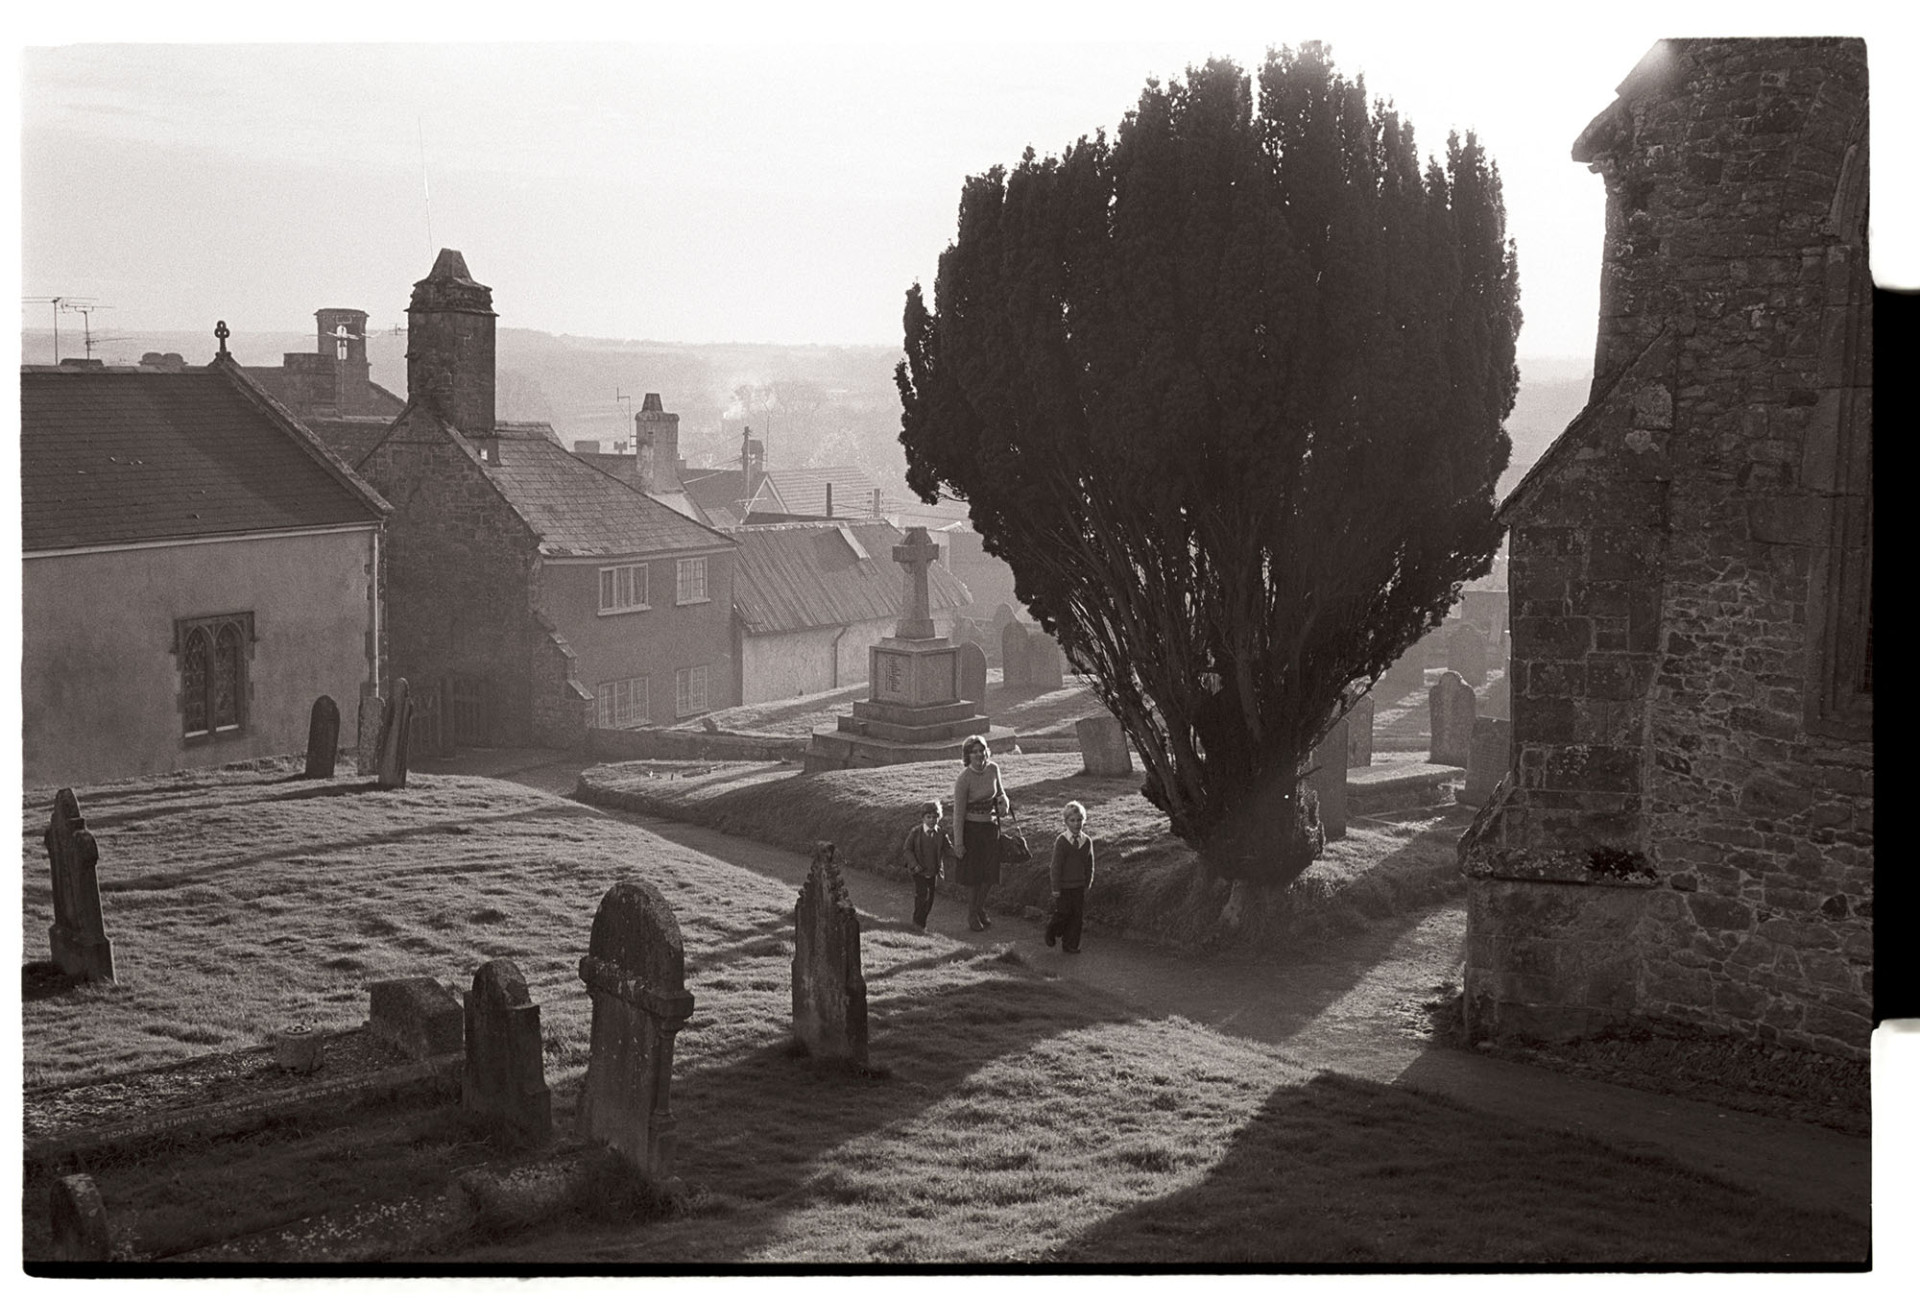 Graveyard, early morning with children going to school. 
[A woman with two children walking through Hatherleigh churchyard on their way to school. Gravestones, a war memorial and a yew tree are all visible in the churchyard.]